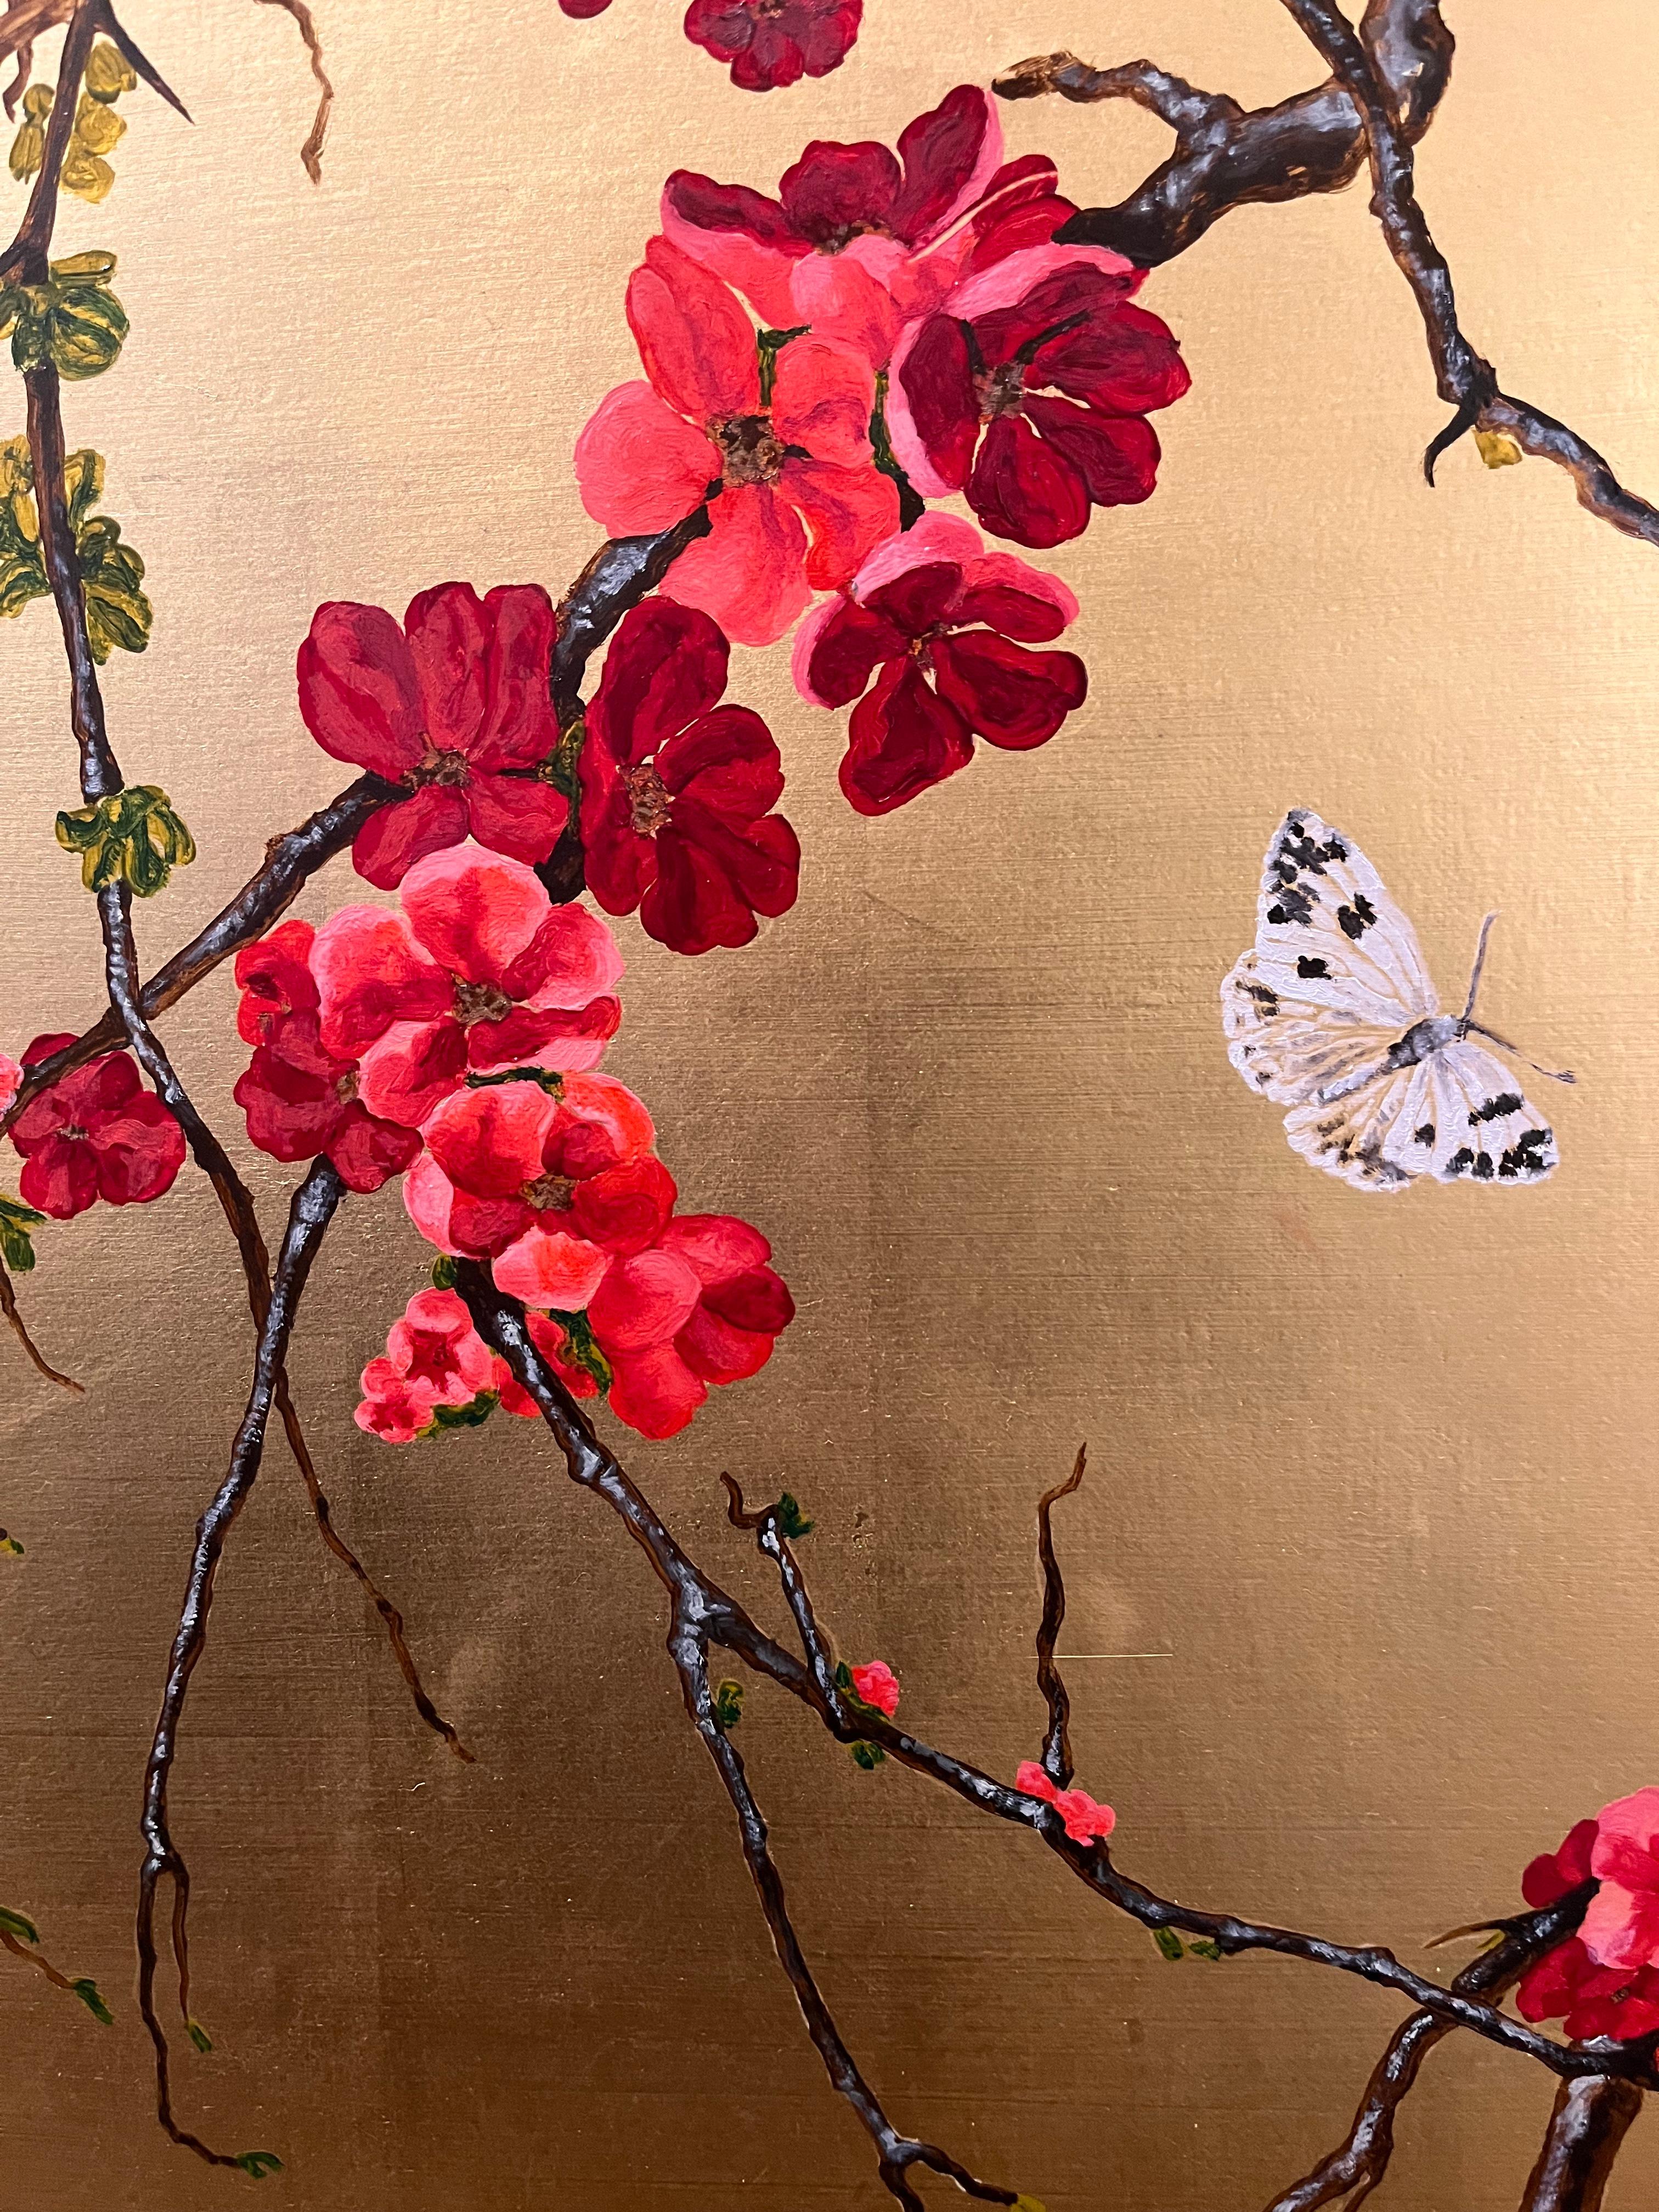 On a self-prepared stainless gold-leaf background, Margherita Leoni has painted lavish and luxuriant red Cydonia flowers hanging from their branches. Butterflies spin gracefully around them.

Due to her sophisticated and mature style, Margherita